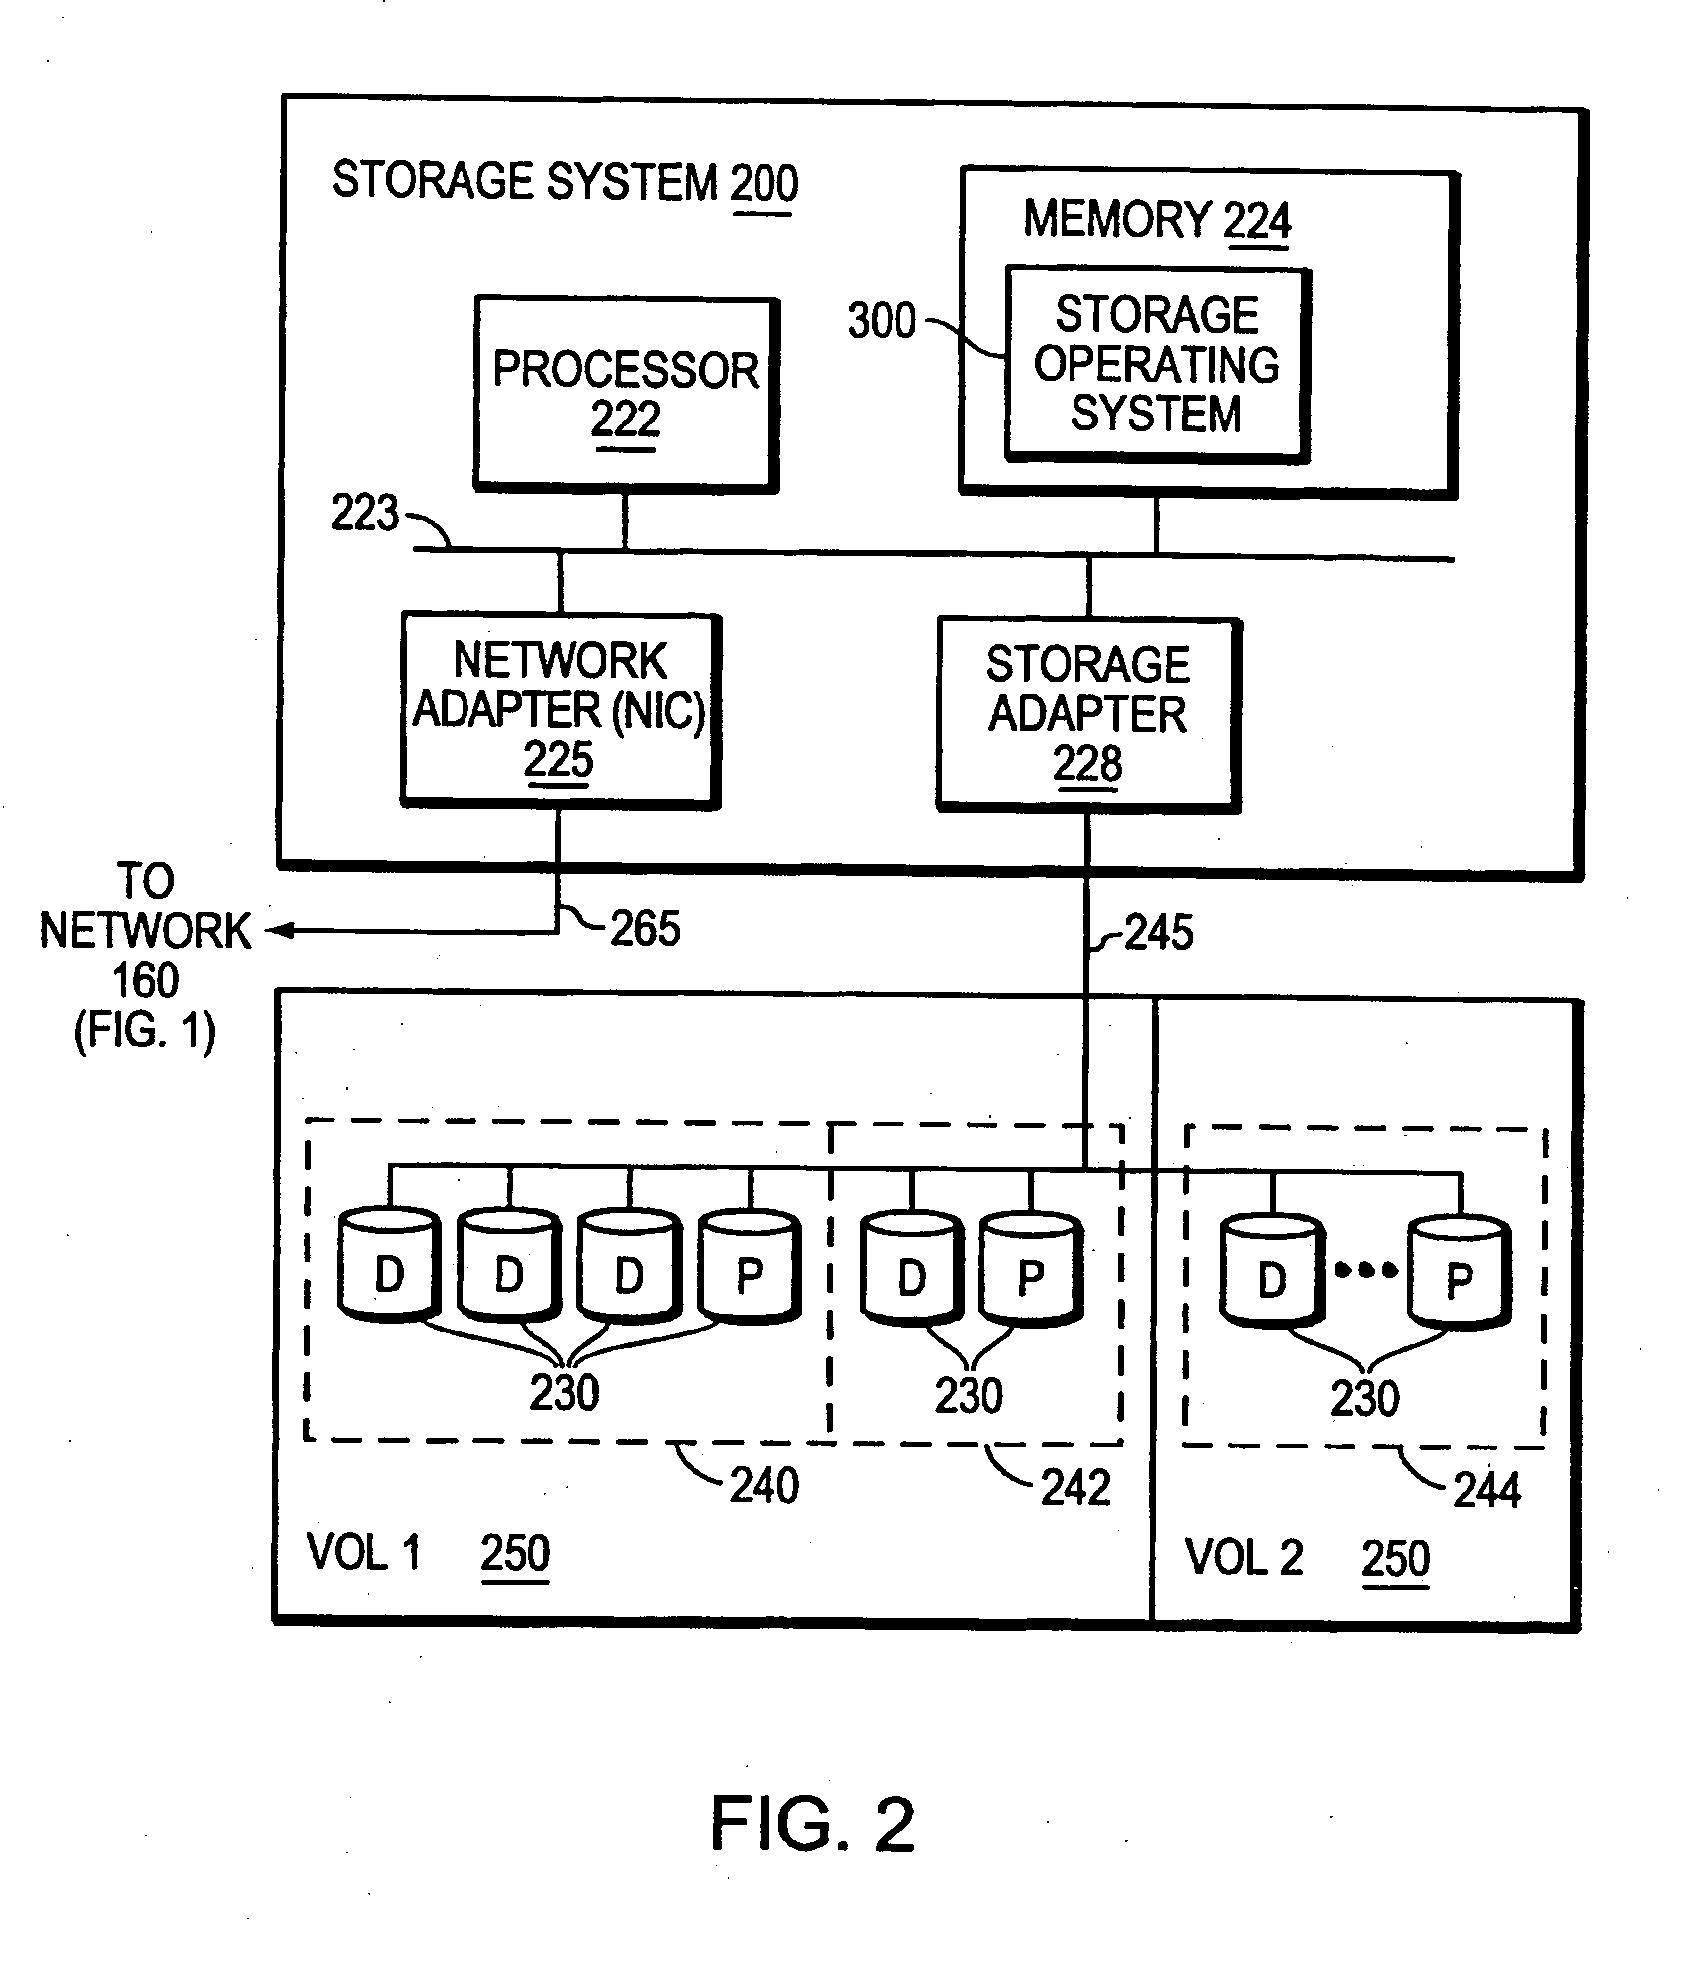 Client failure fencing mechanism for fencing network file system data in a host-cluster environment